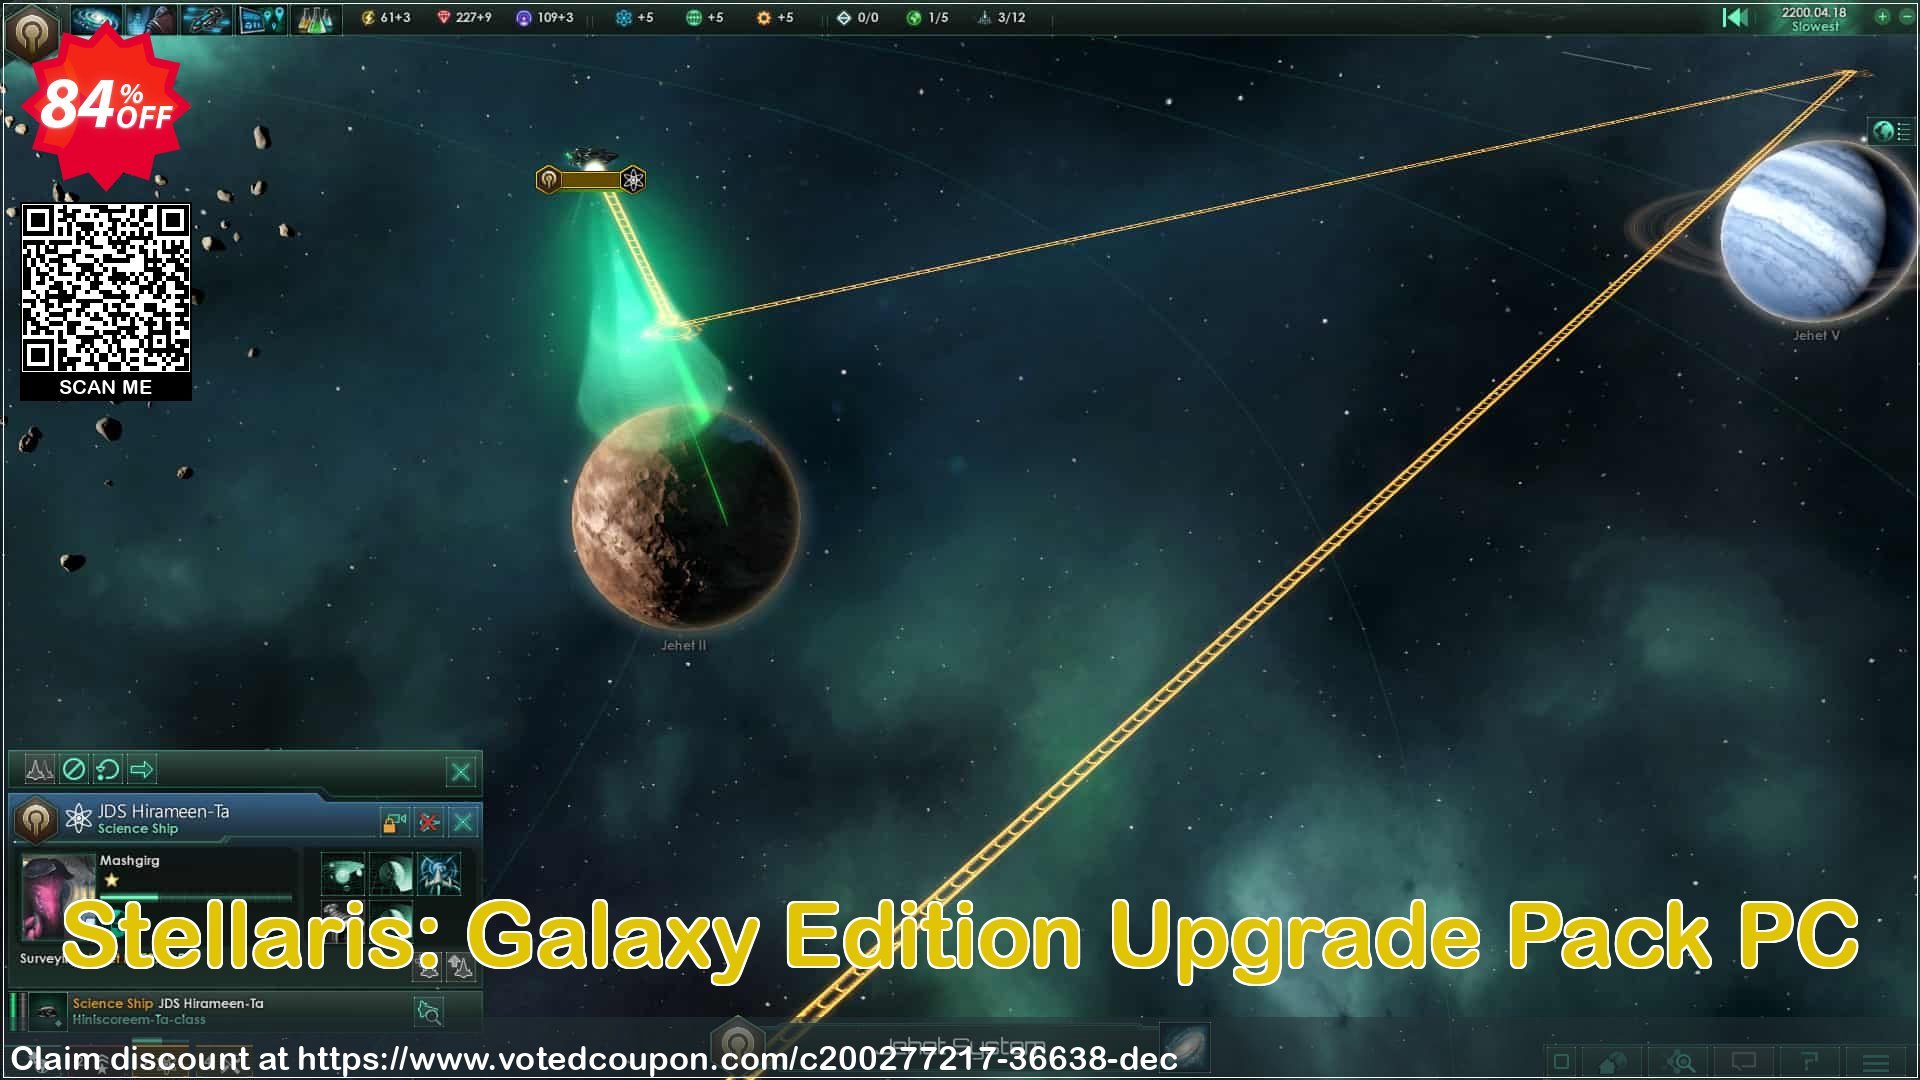 Stellaris: Galaxy Edition Upgrade Pack PC Coupon Code May 2024, 84% OFF - VotedCoupon